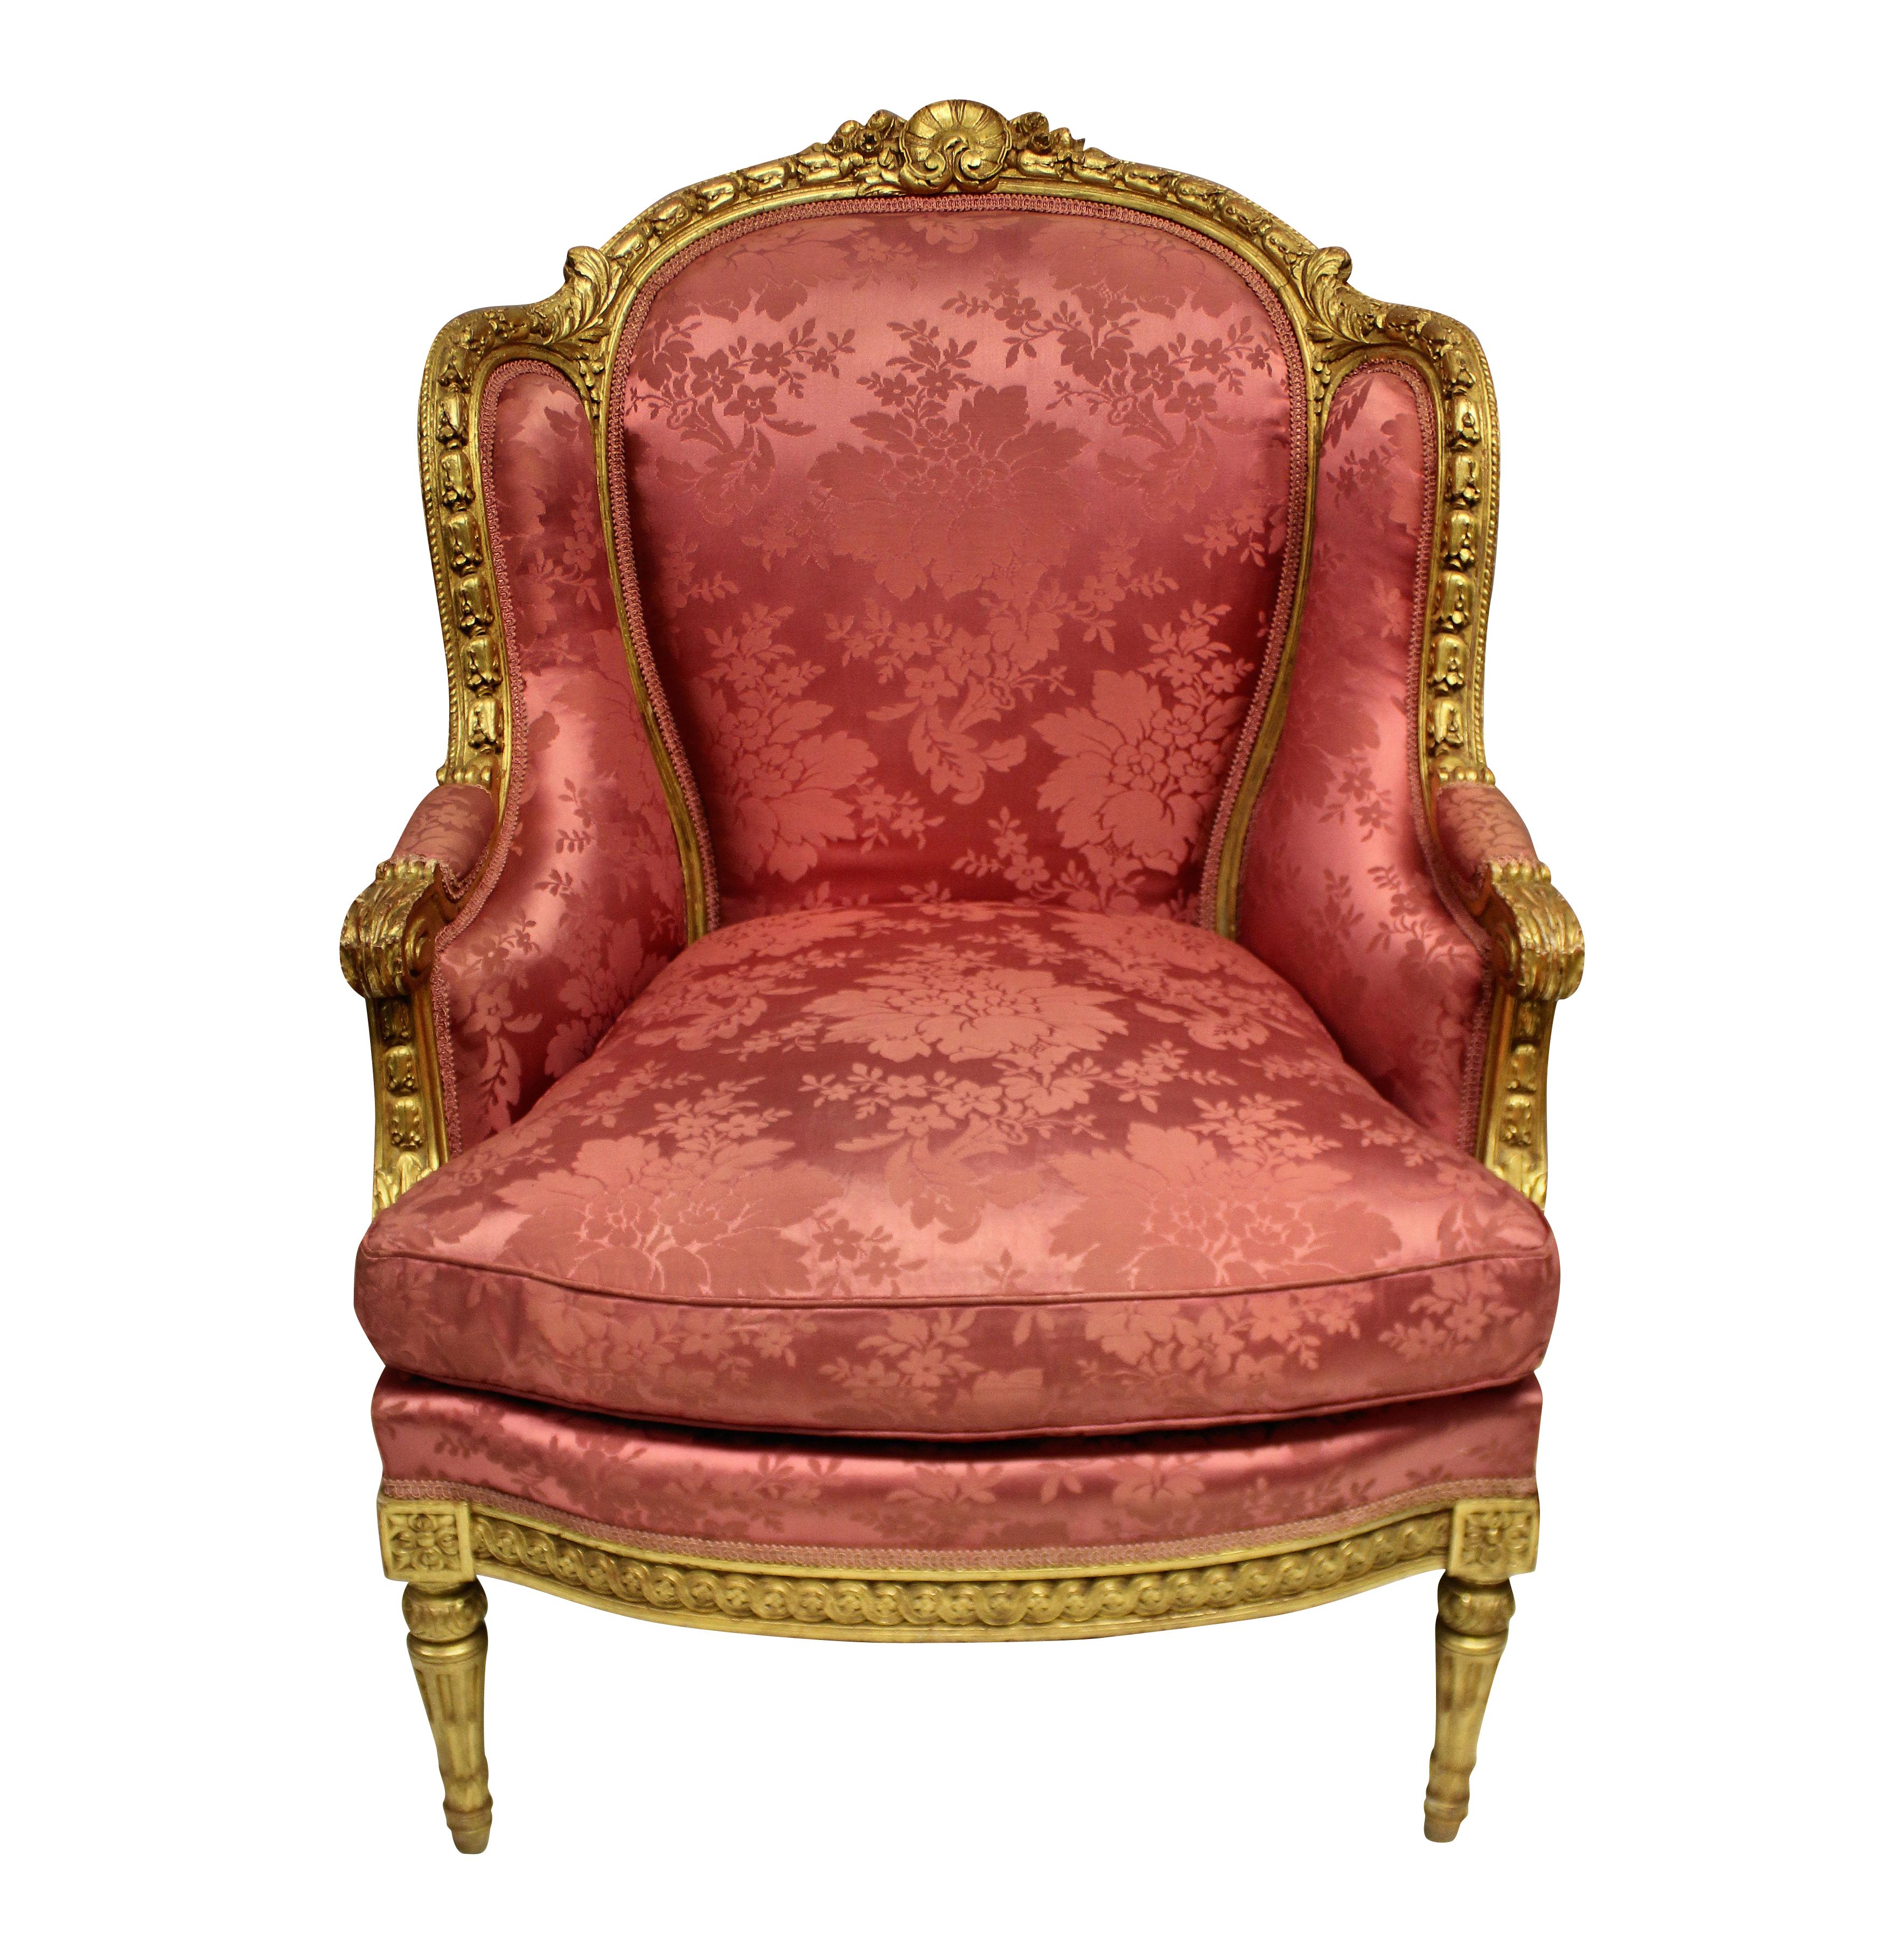 A fine pair of Louis XVI bergère a Oreilles, carved, water gilded and burnished and in pink silk damask. The upholstery dates to the mid 20th century and is in good condition.

Full provenance available.